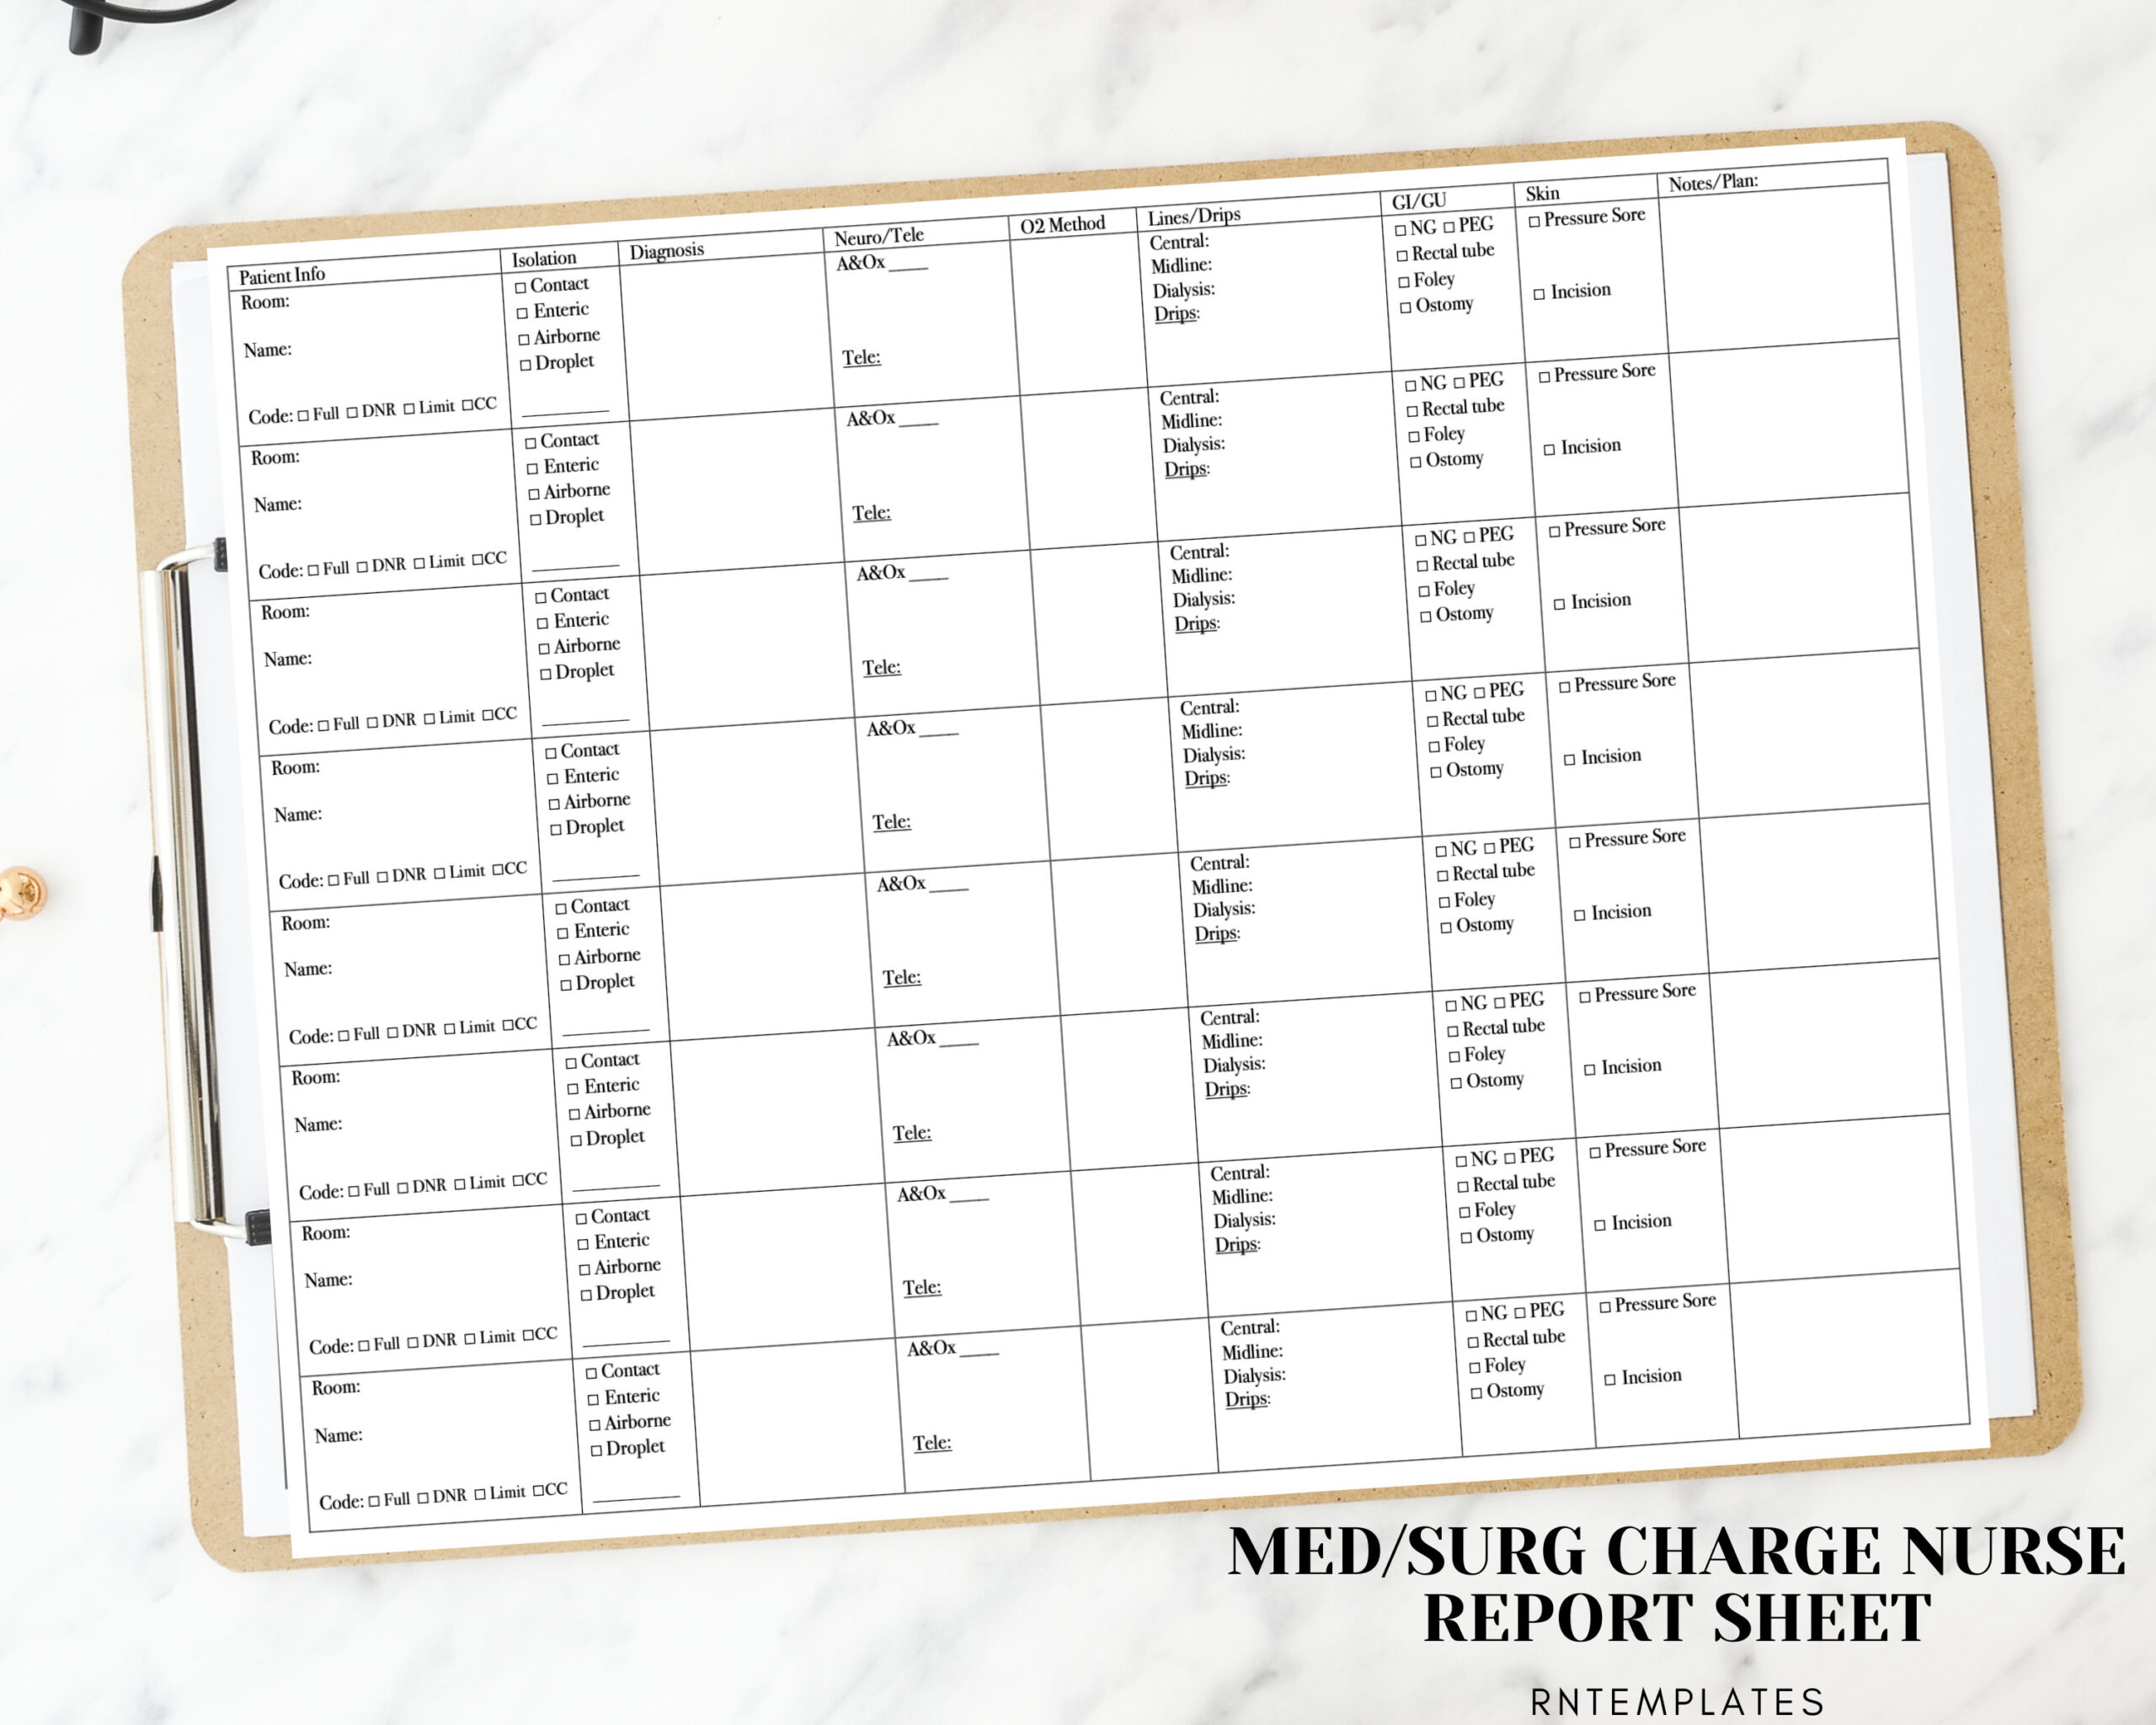 Charge Nurse Brain Report Sheet Med/surg Version Nurse - Etsy Regarding Charge Nurse Report Sheet Template